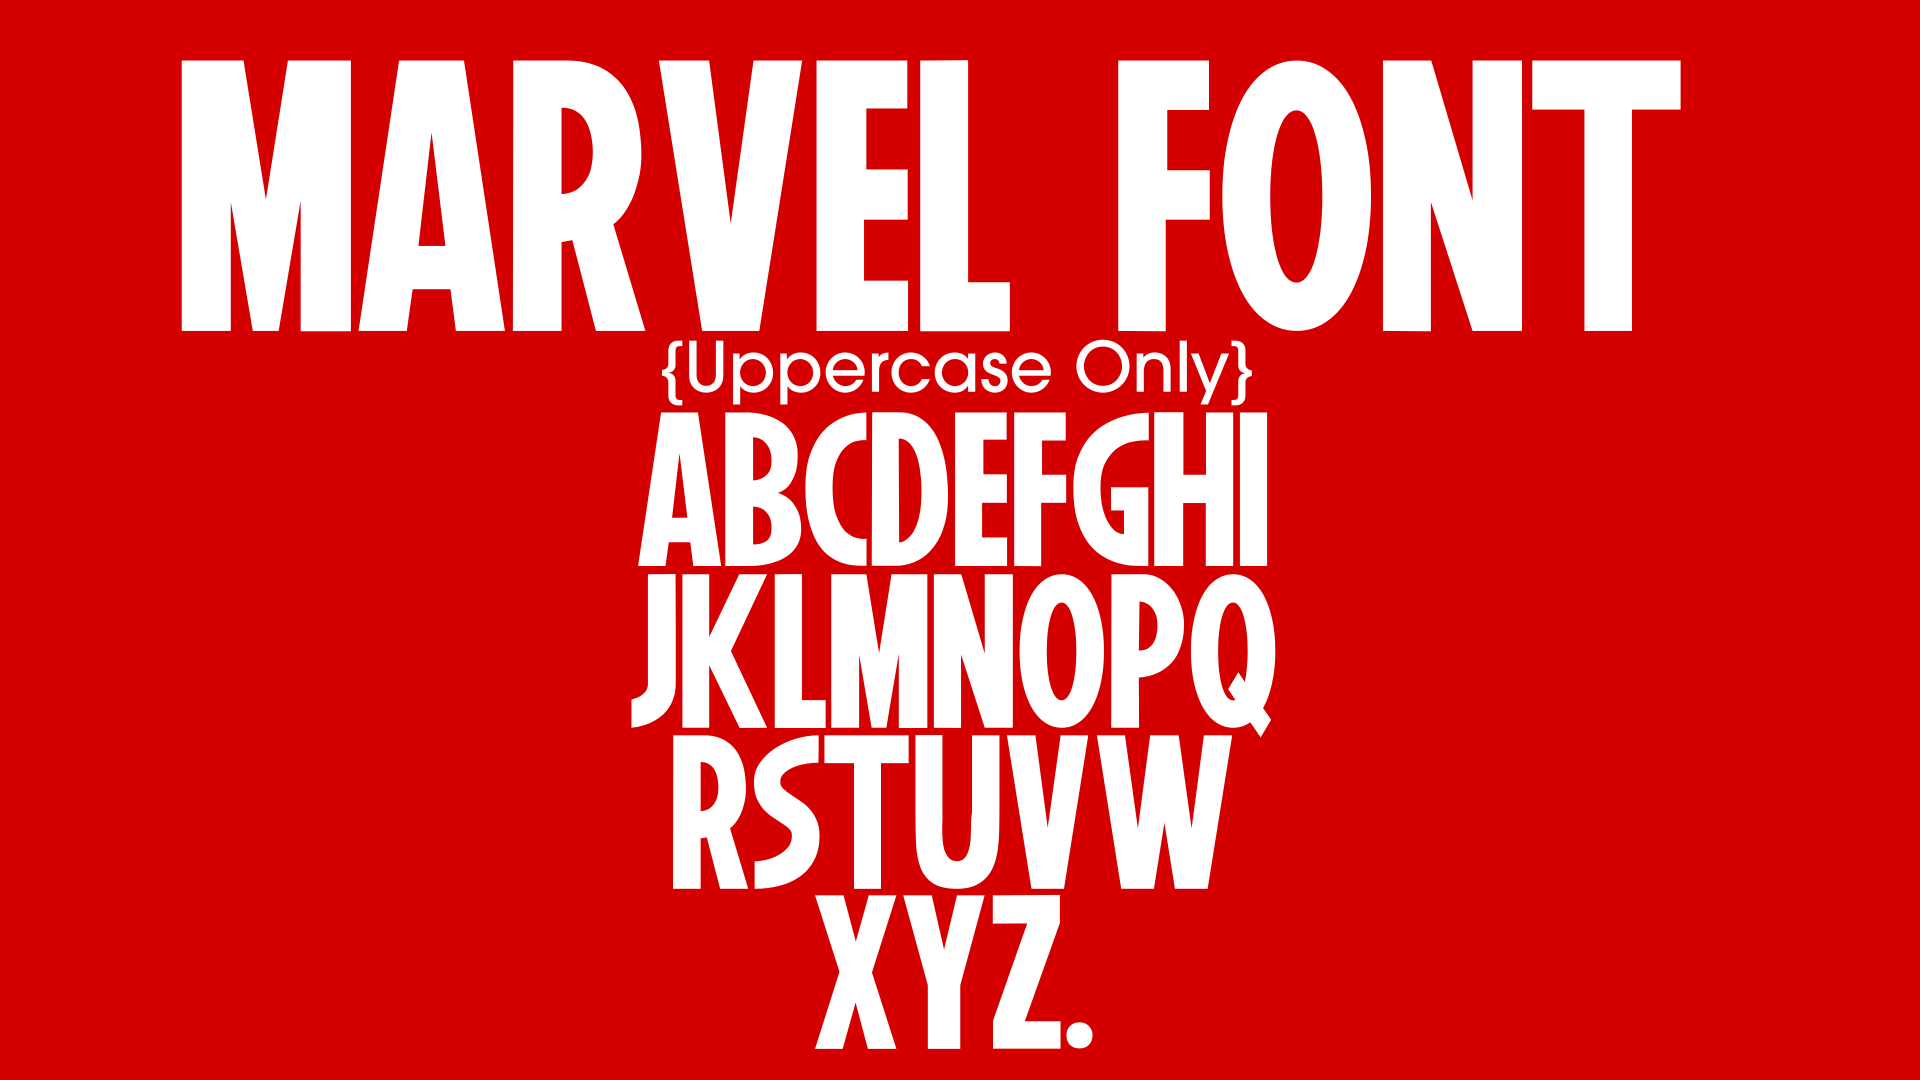 Marvel Windows font - free for Personal